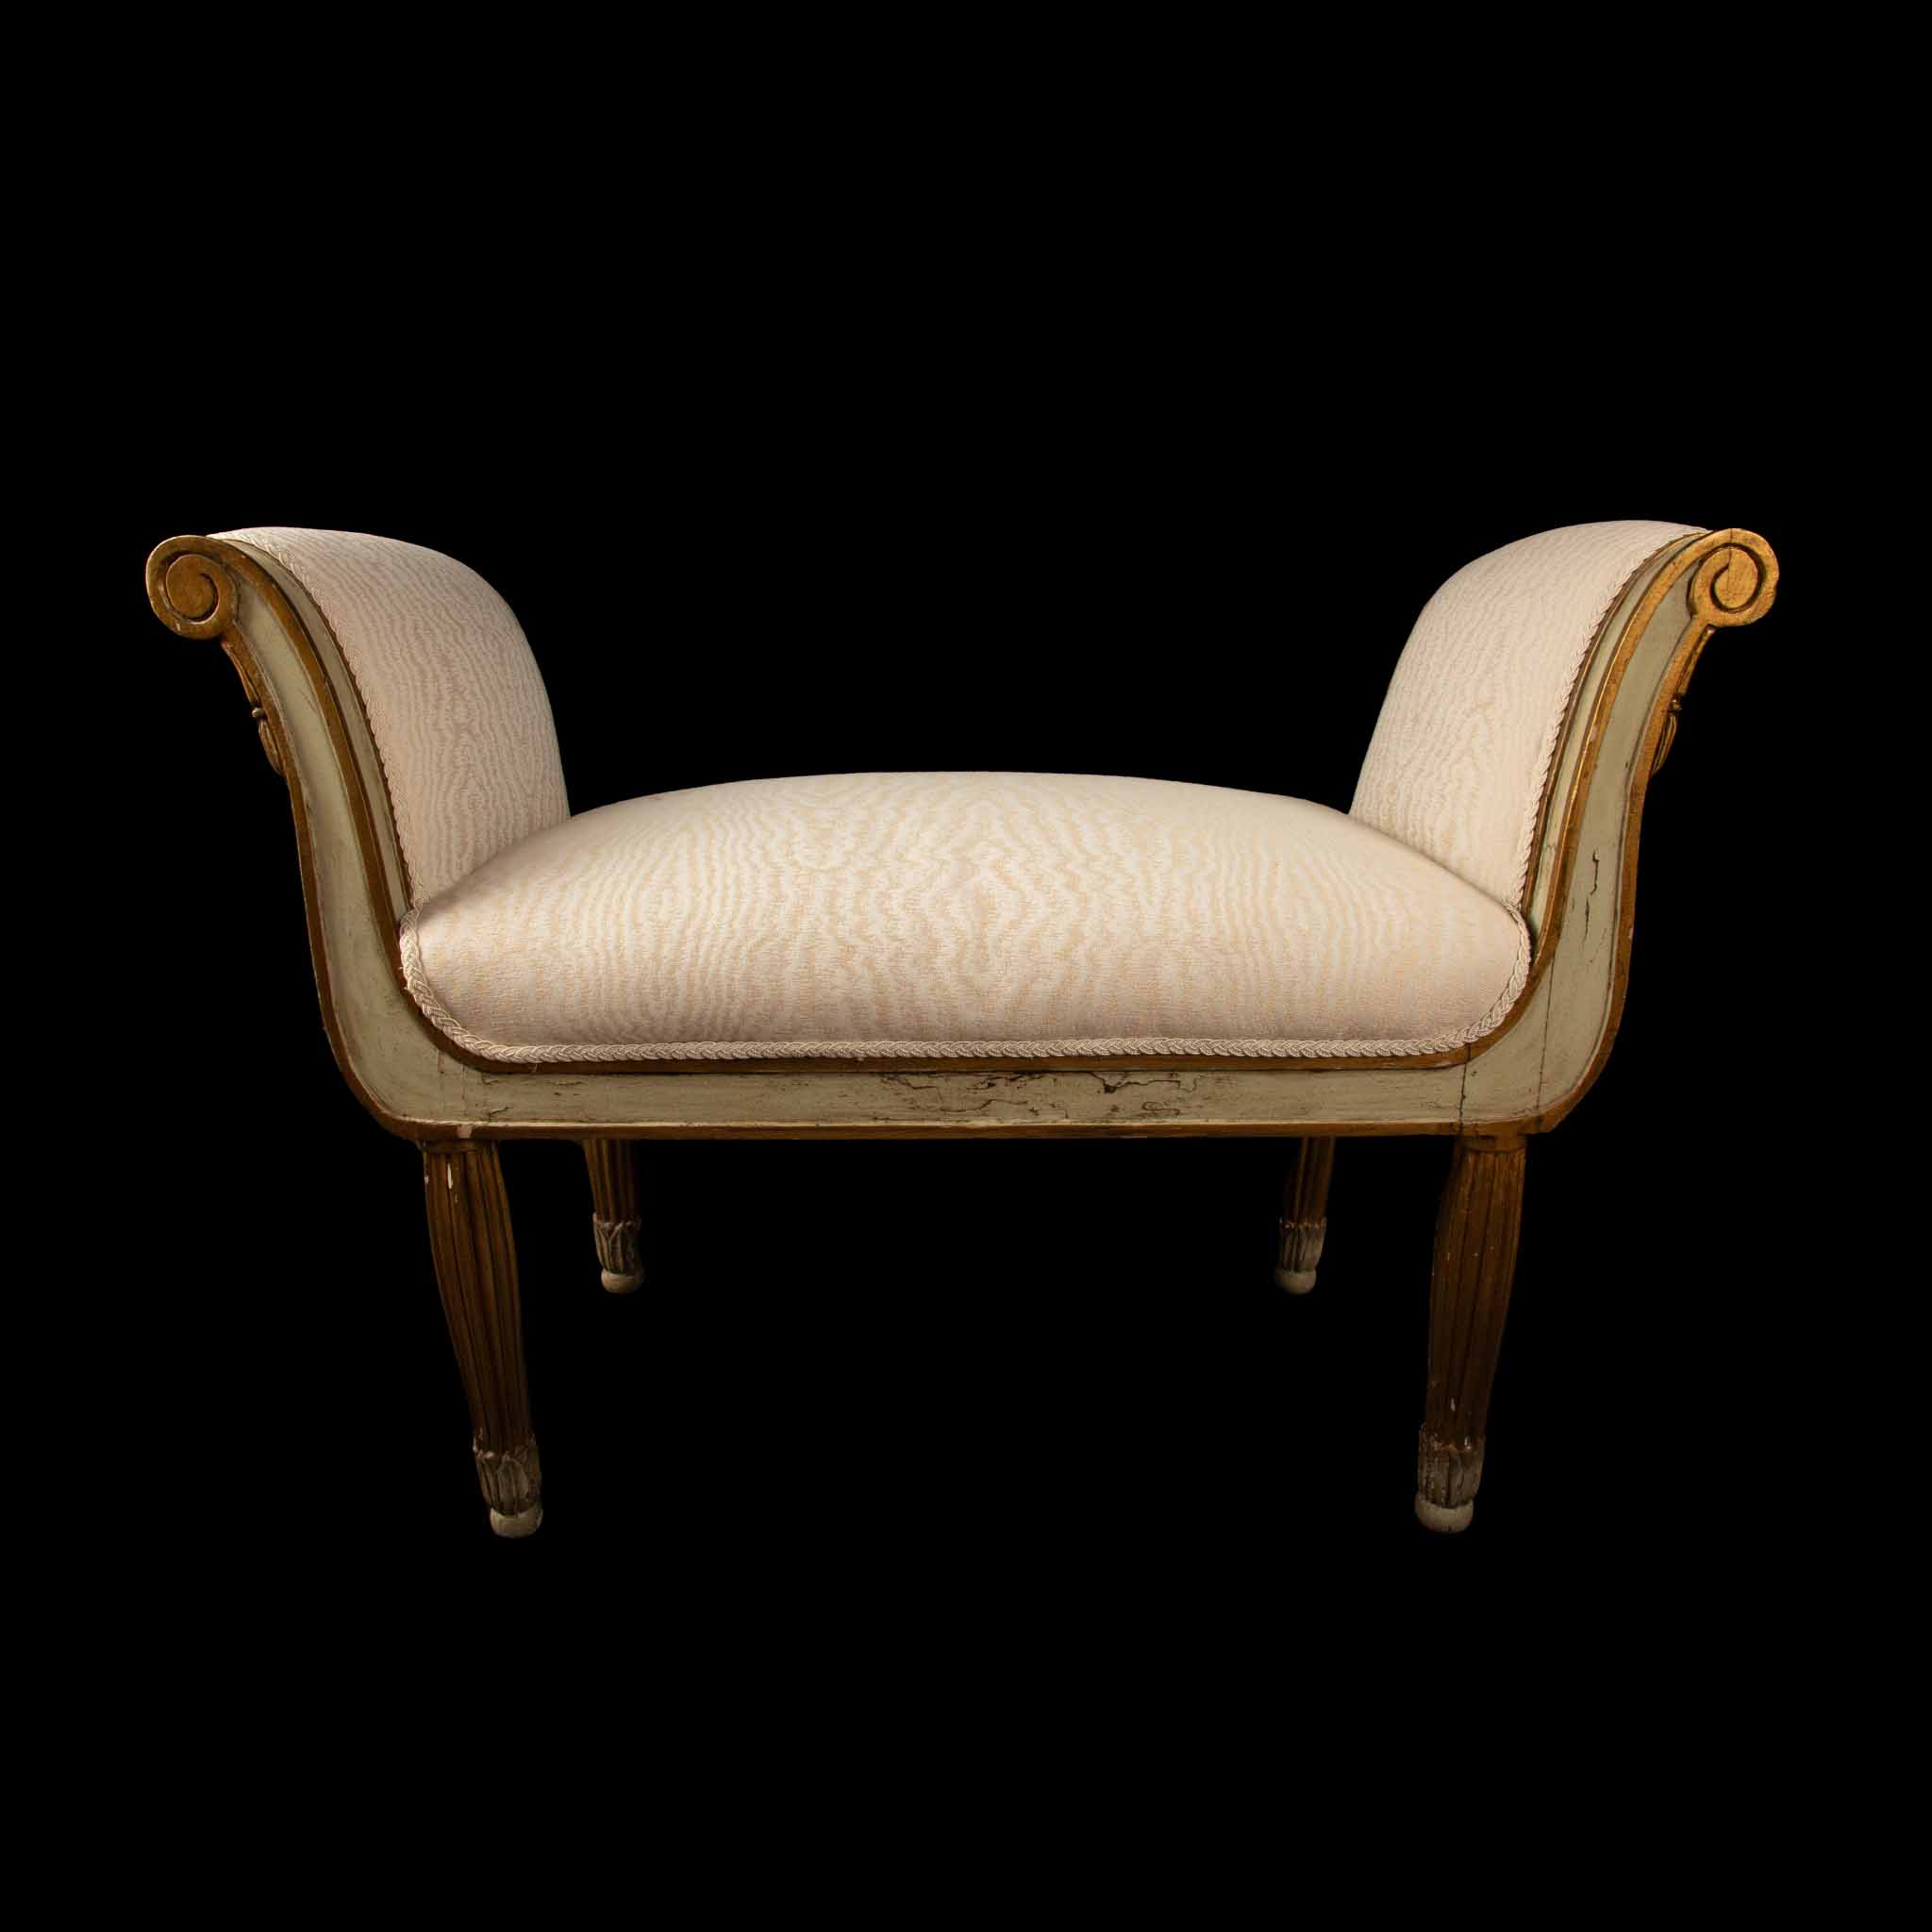 Sage Elegance: 1920s Italian Bench with Gilt Accents